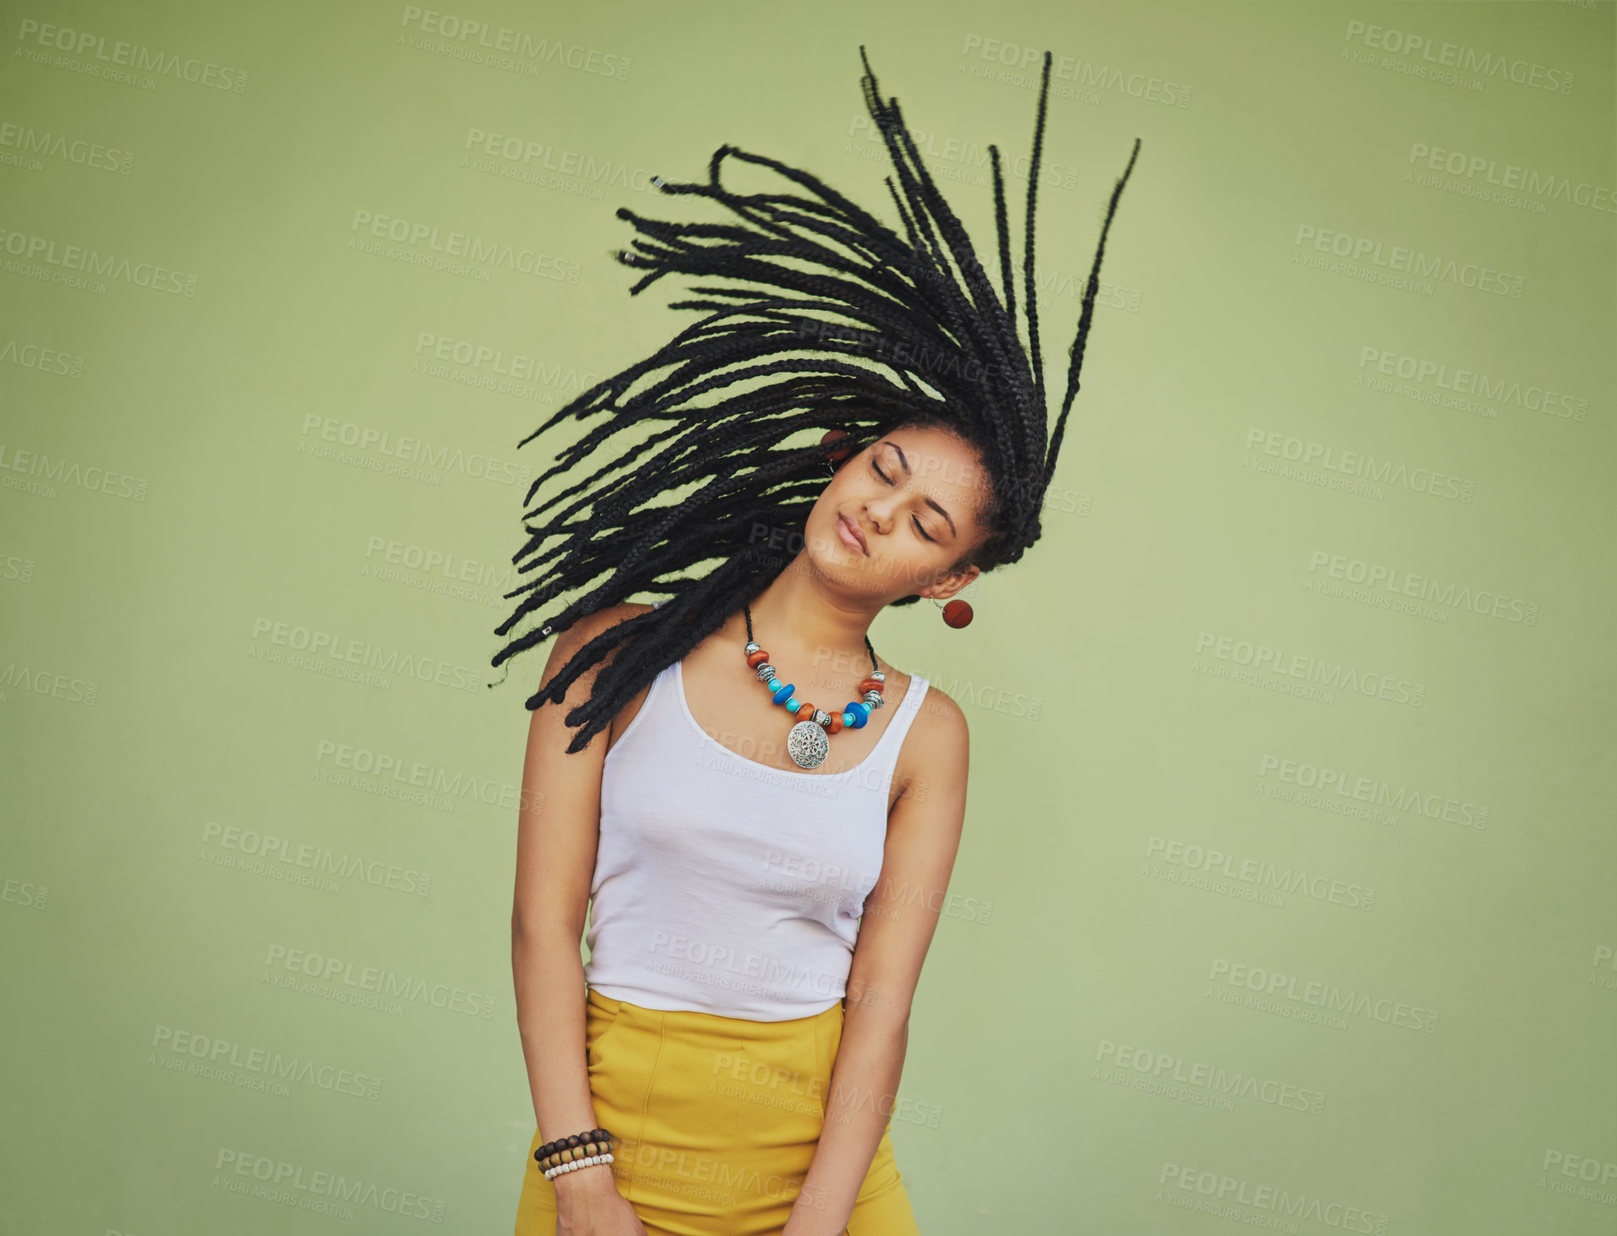 Buy stock photo Shot of an attractive young woman tossing her hair against a green background